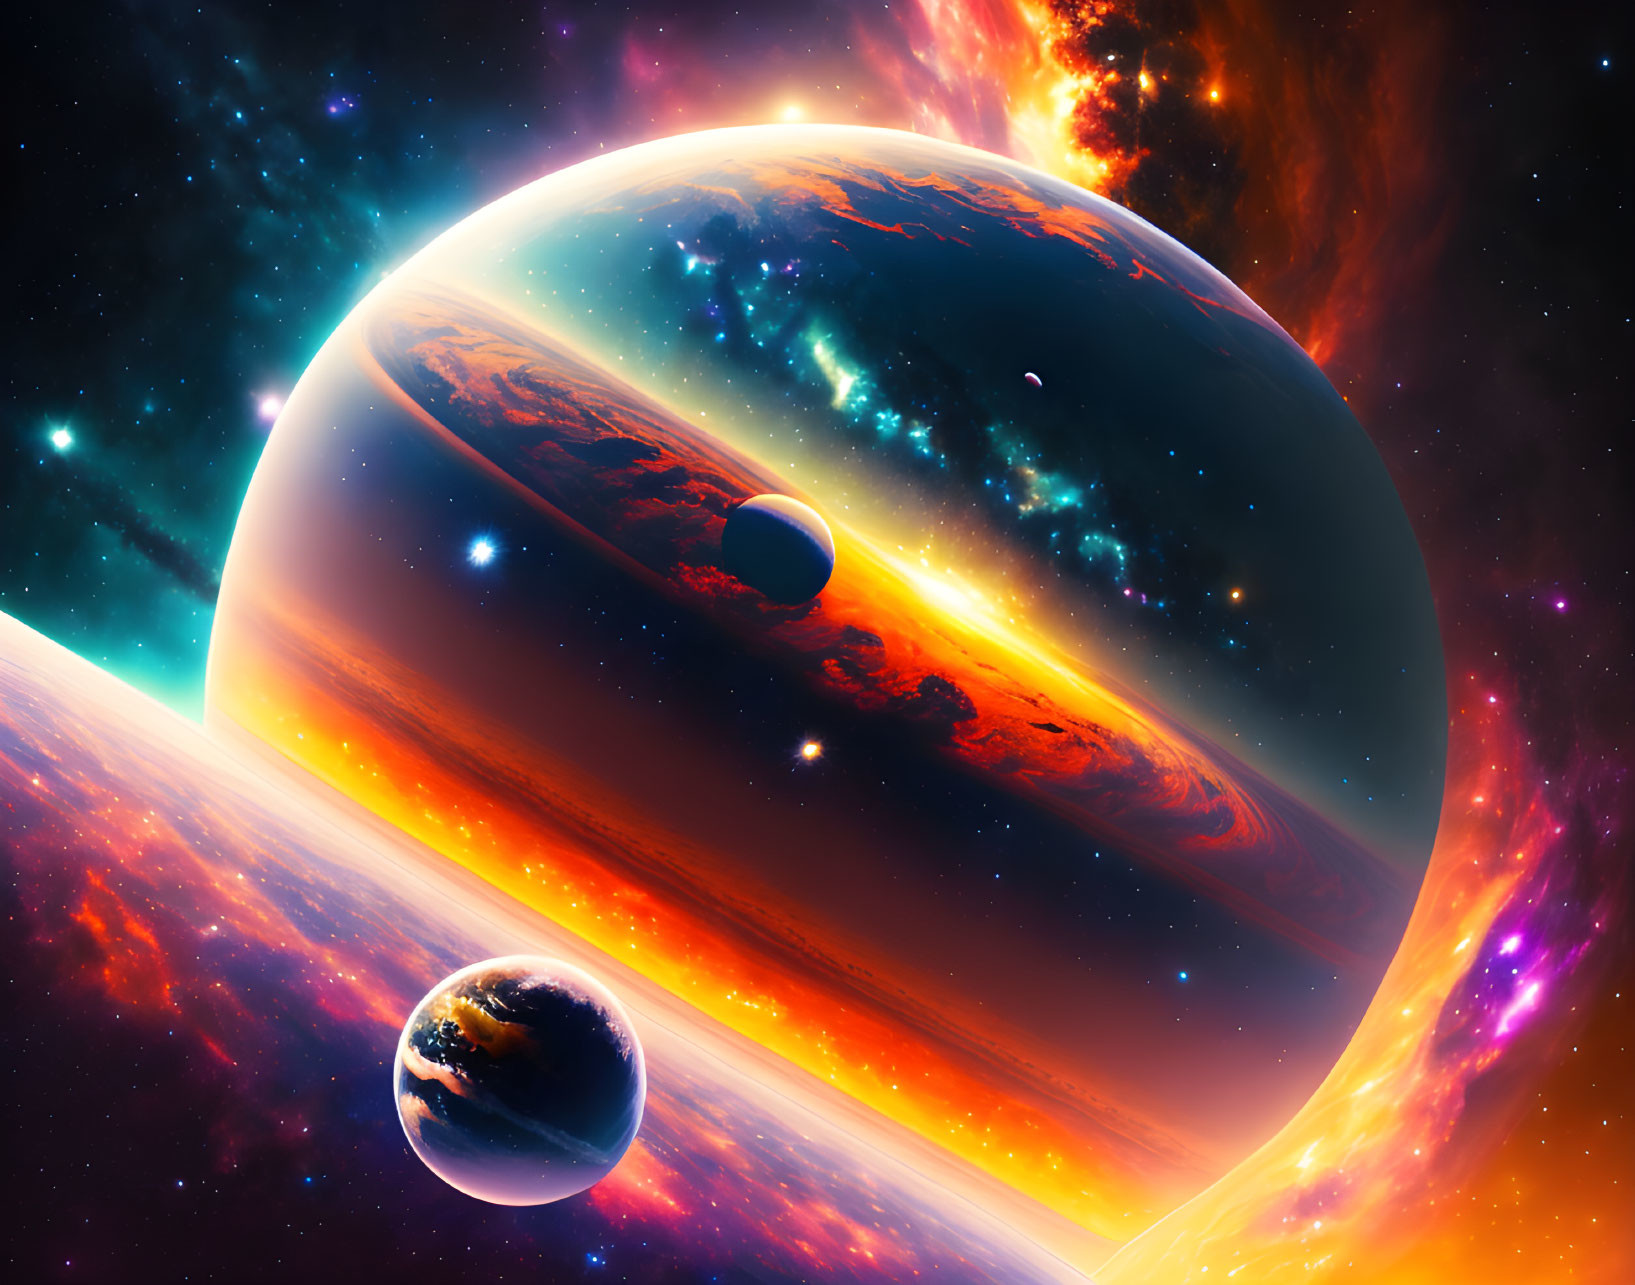 Colorful space scene with fiery planets and bright stars against nebula backdrop